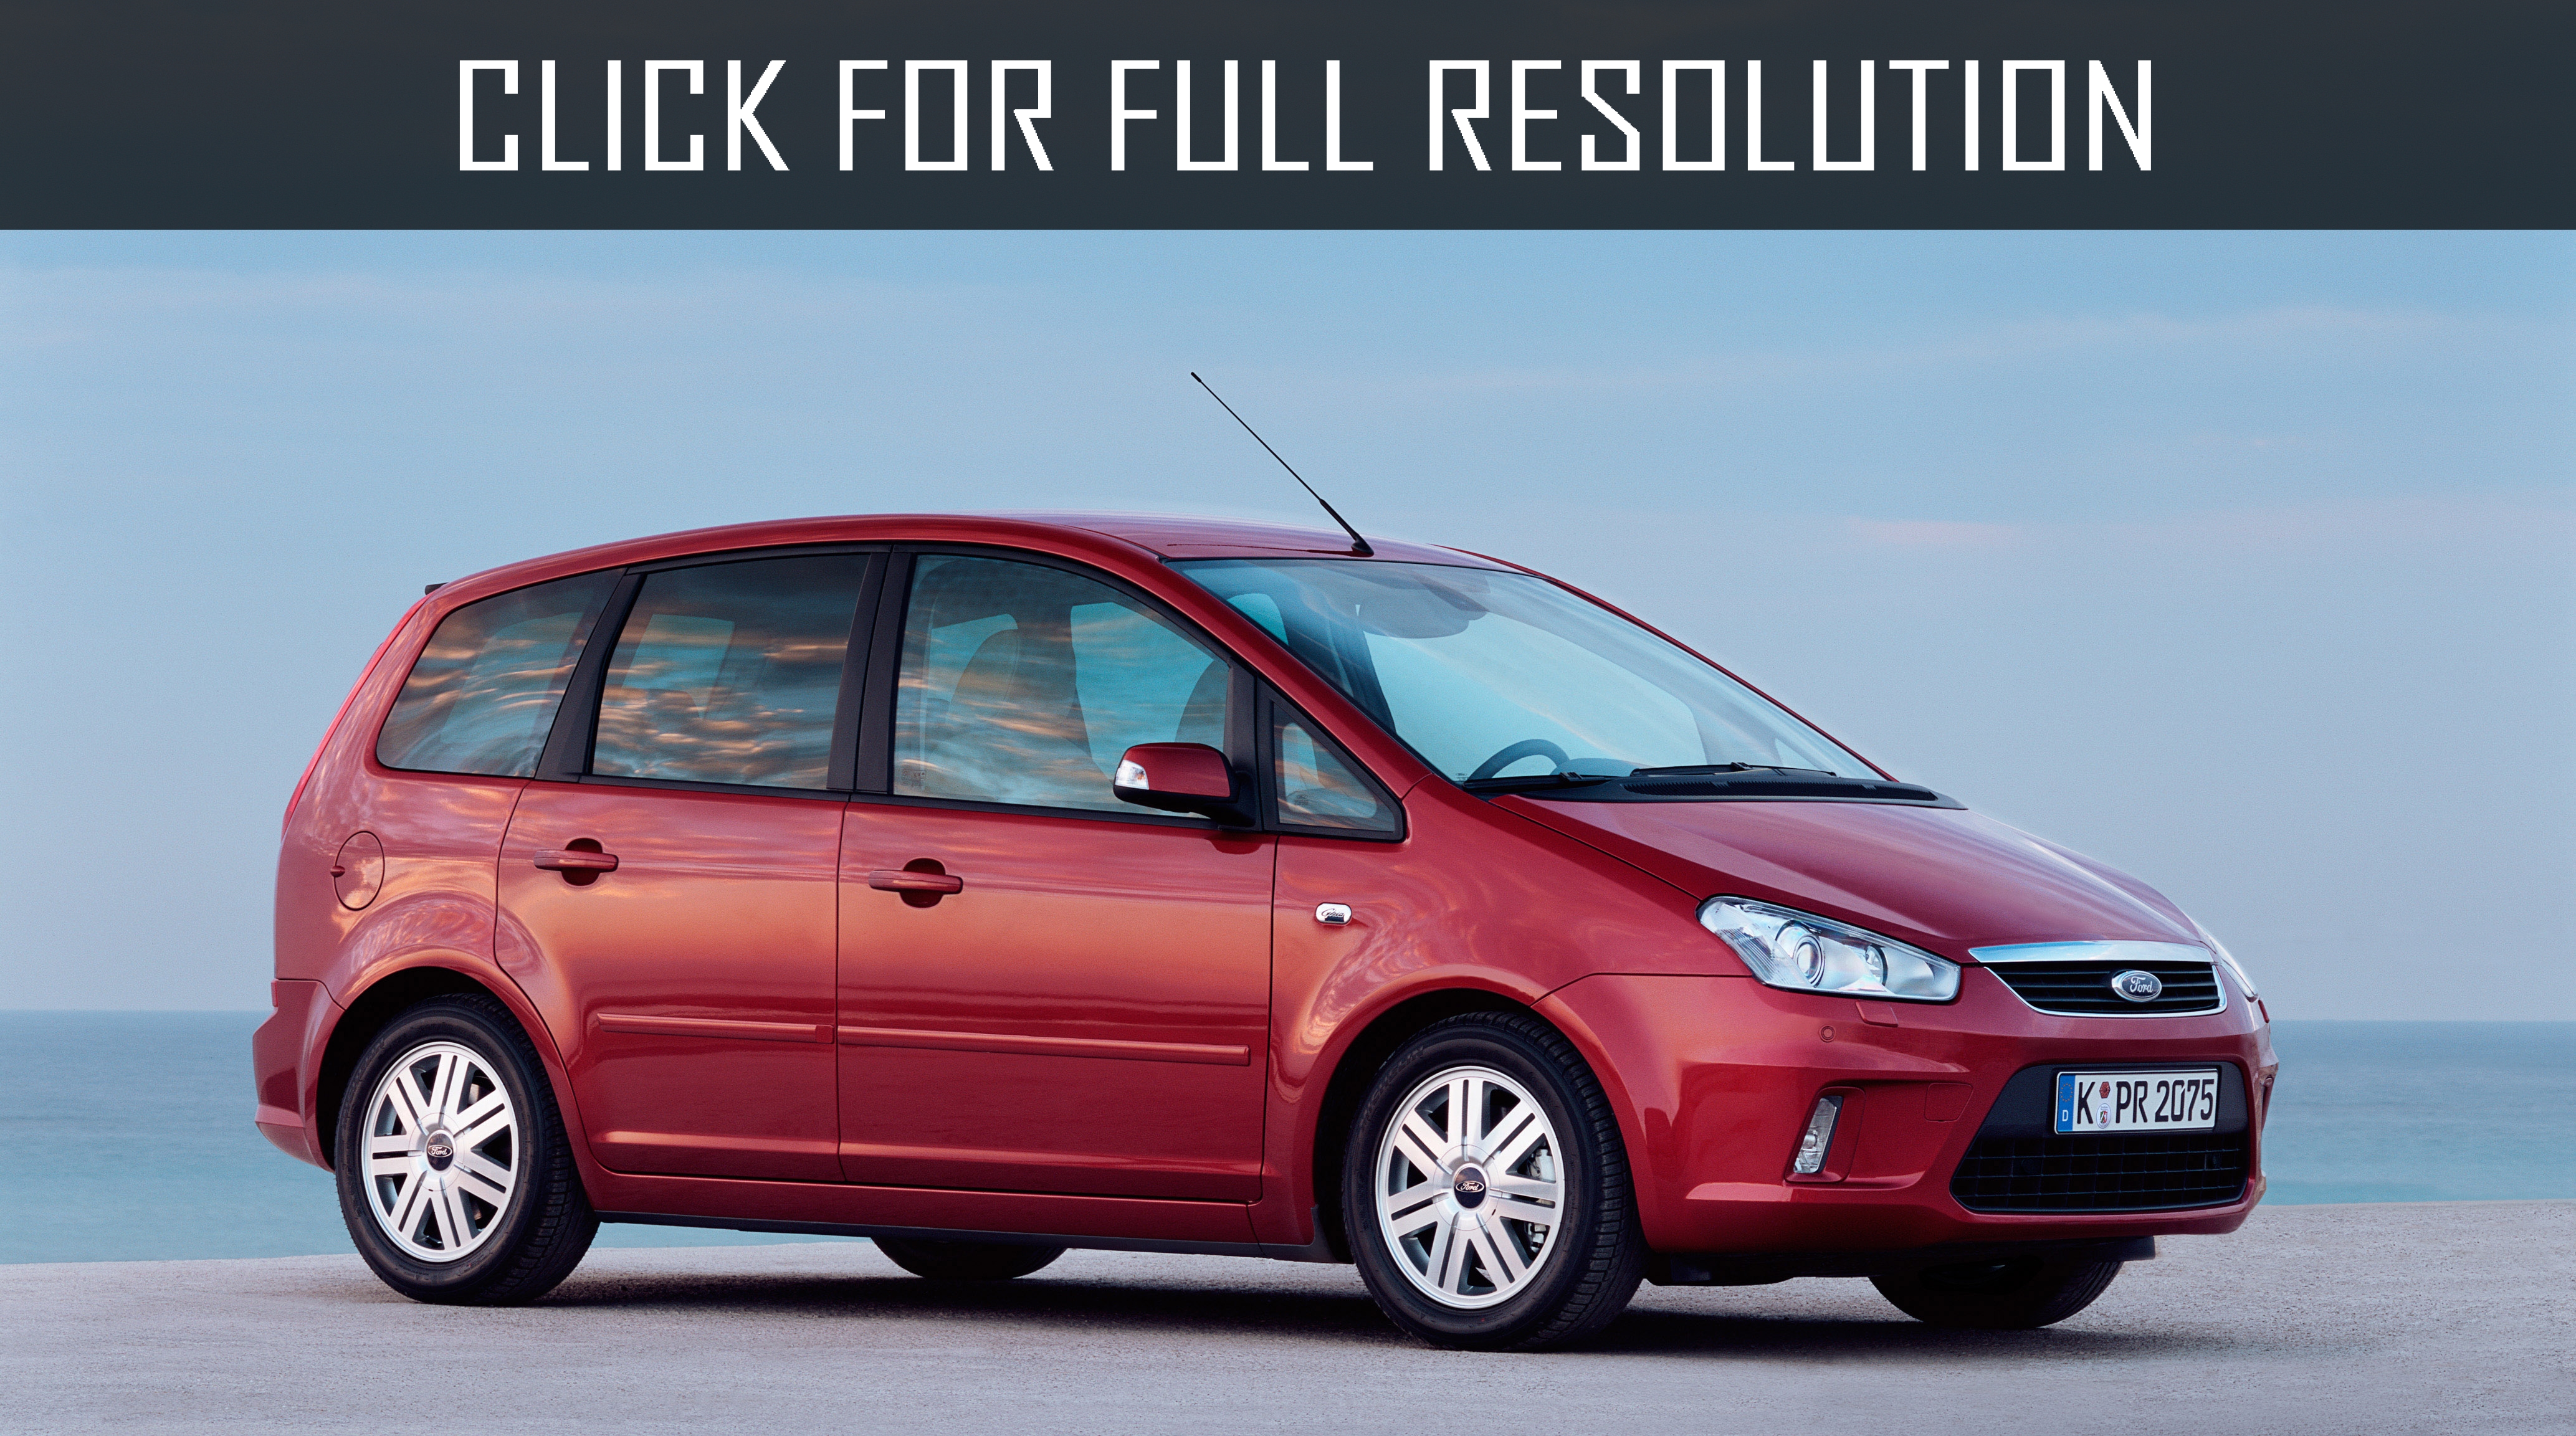 2007 Ford C-Max